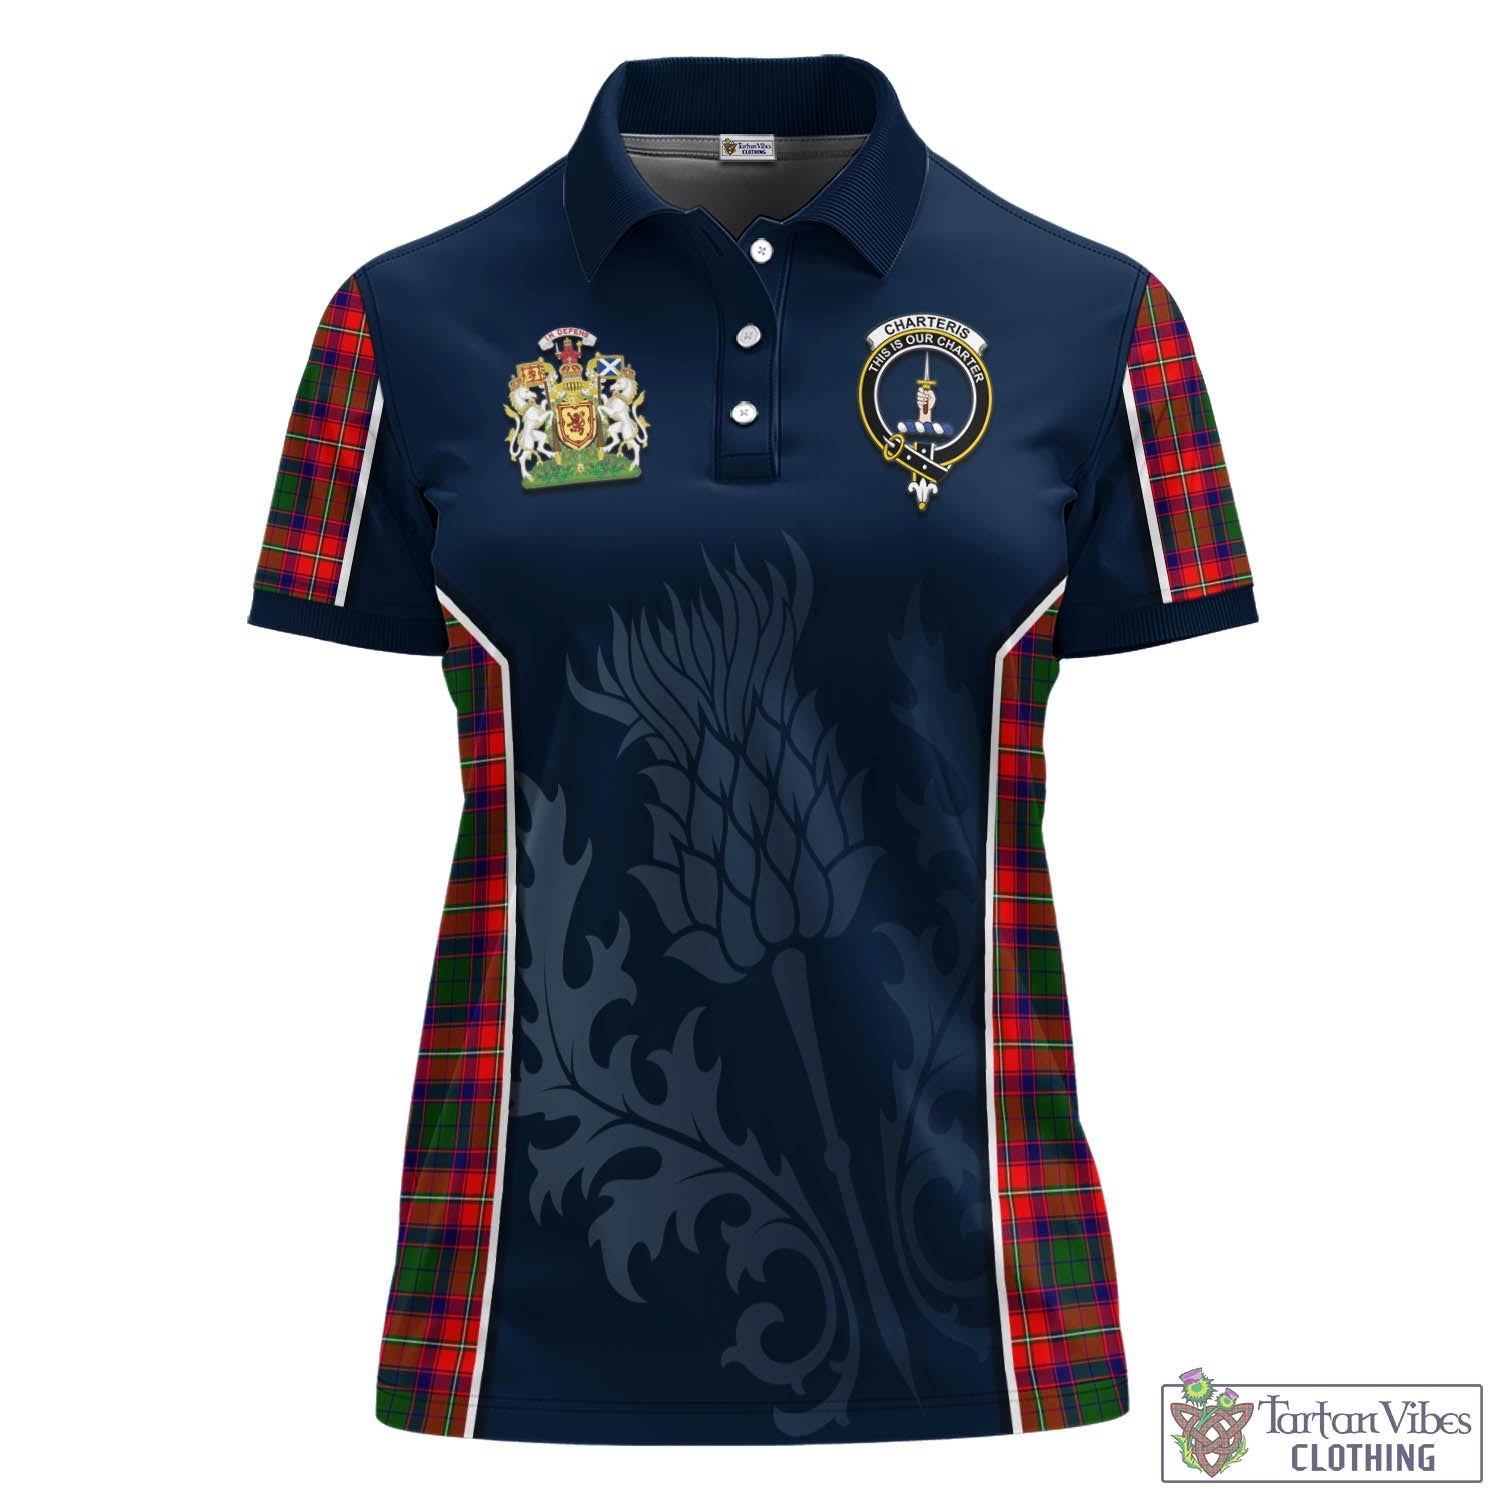 Tartan Vibes Clothing Charteris Tartan Women's Polo Shirt with Family Crest and Scottish Thistle Vibes Sport Style